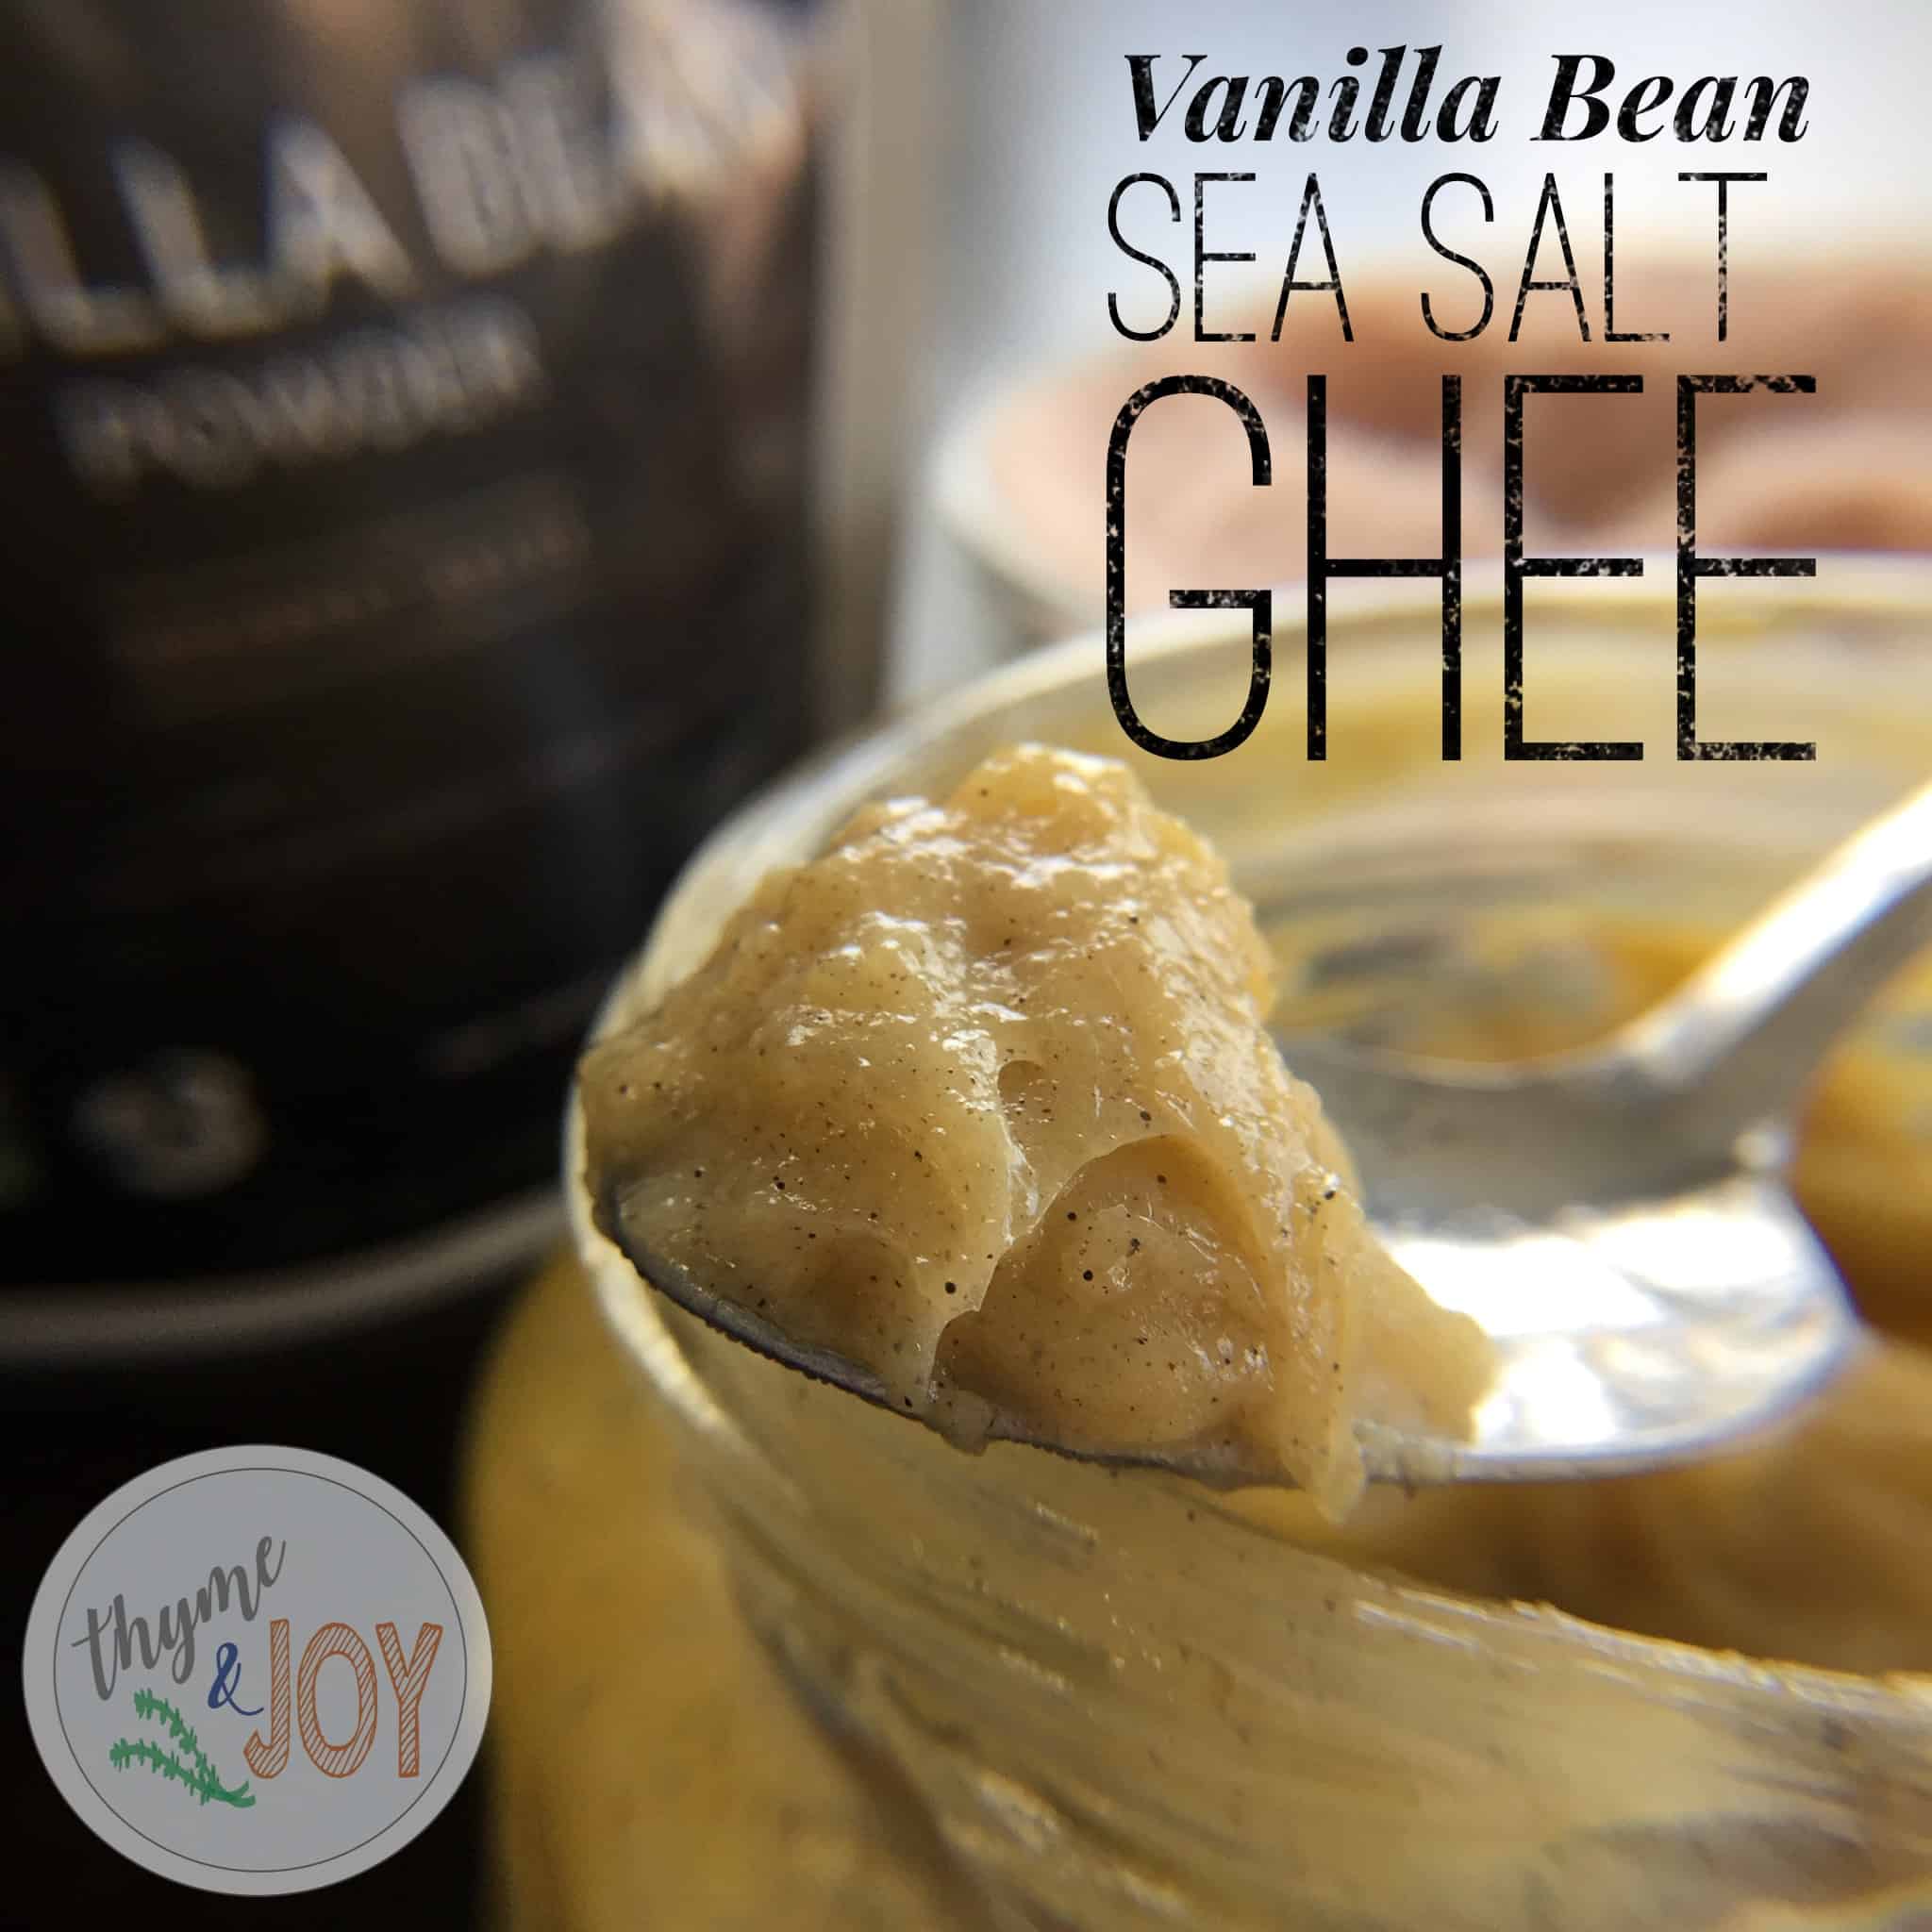 This vanilla bean sea salt ghee is a perfect subsittute for buying expensive brands. It is also great in coffee, on baked goods and suitable for Whole30. #keto #whole30